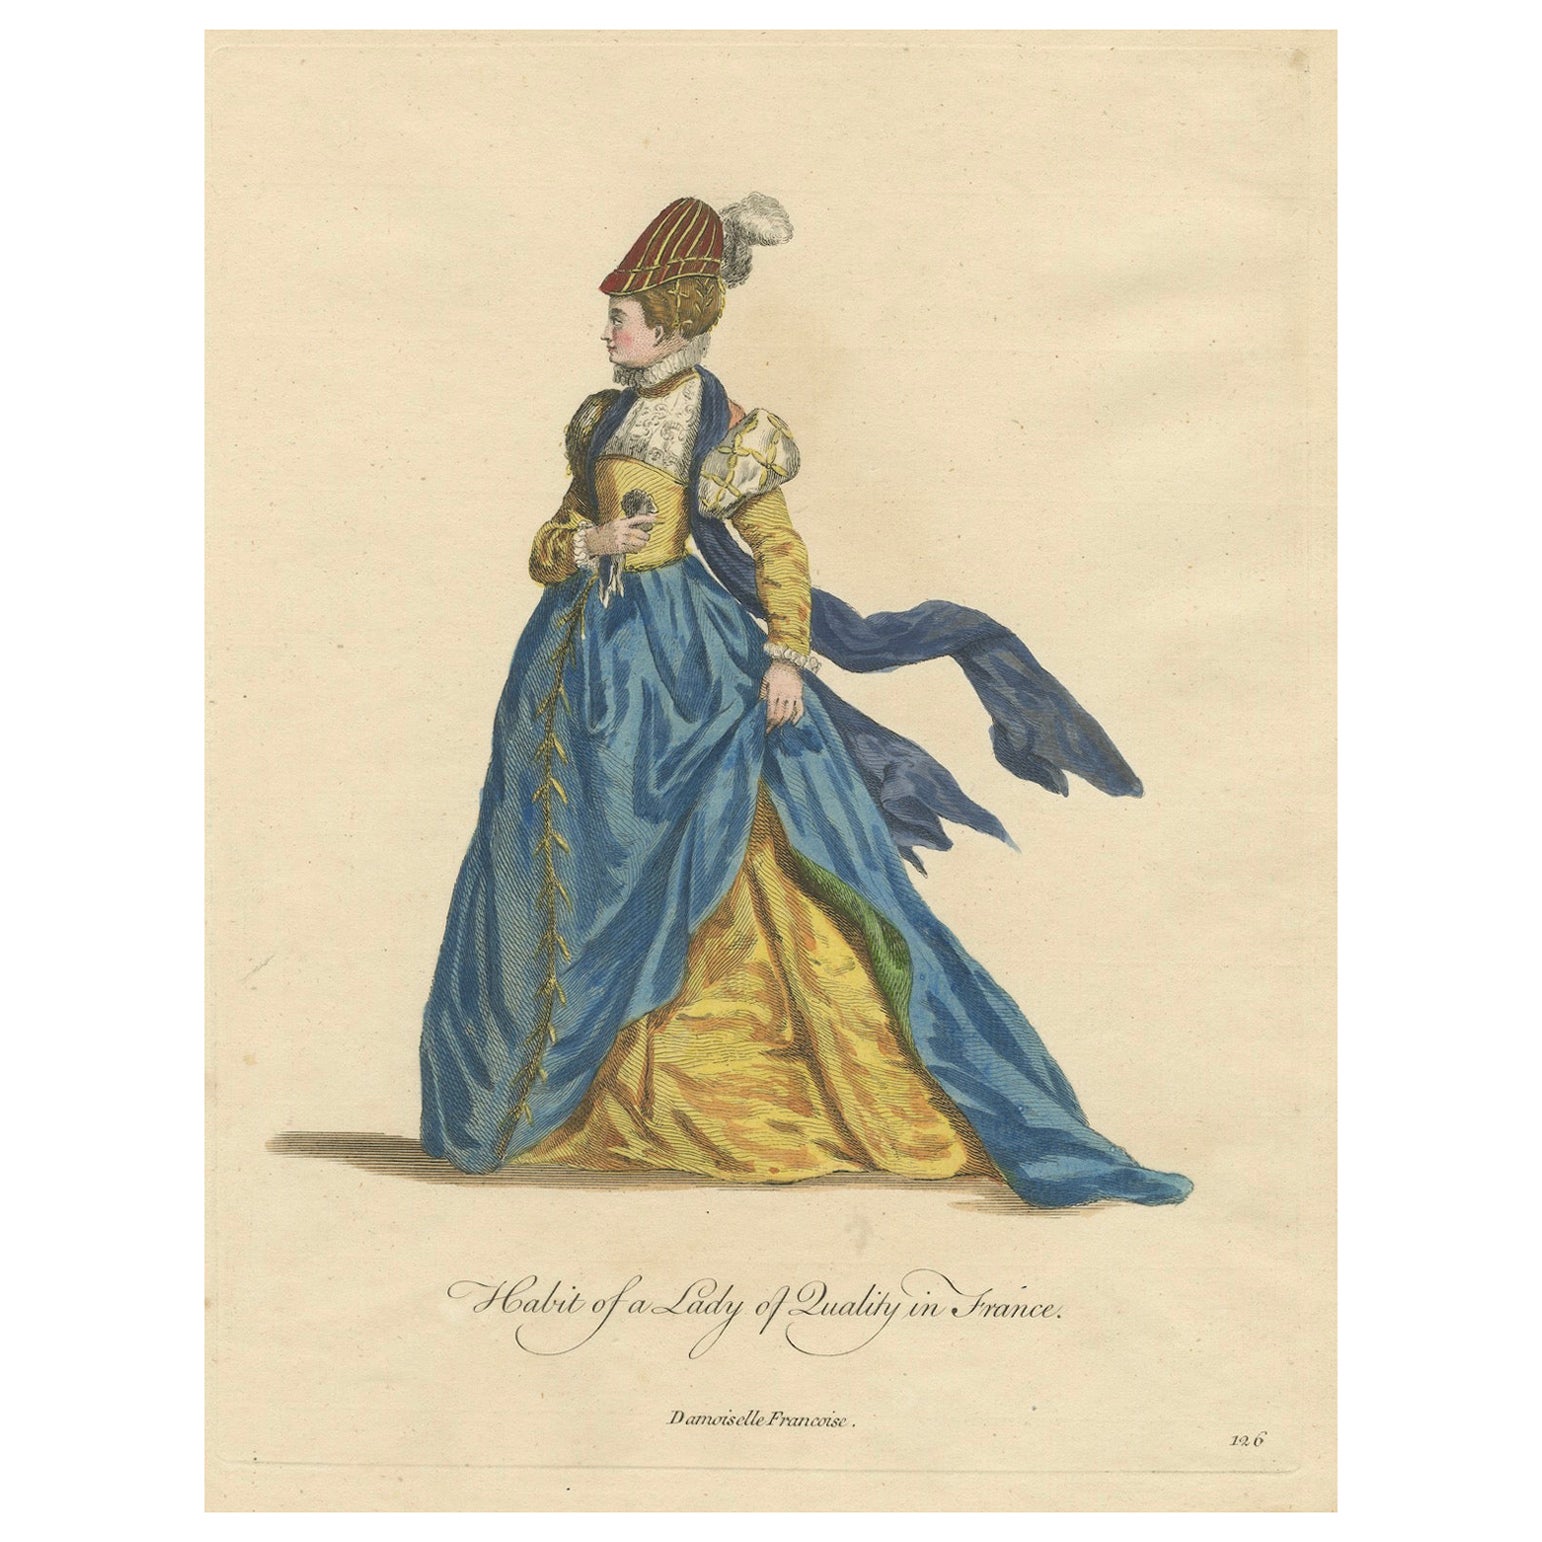 Habit of a Lady of Quality in France in a Hand-Colored Engraving, 1757